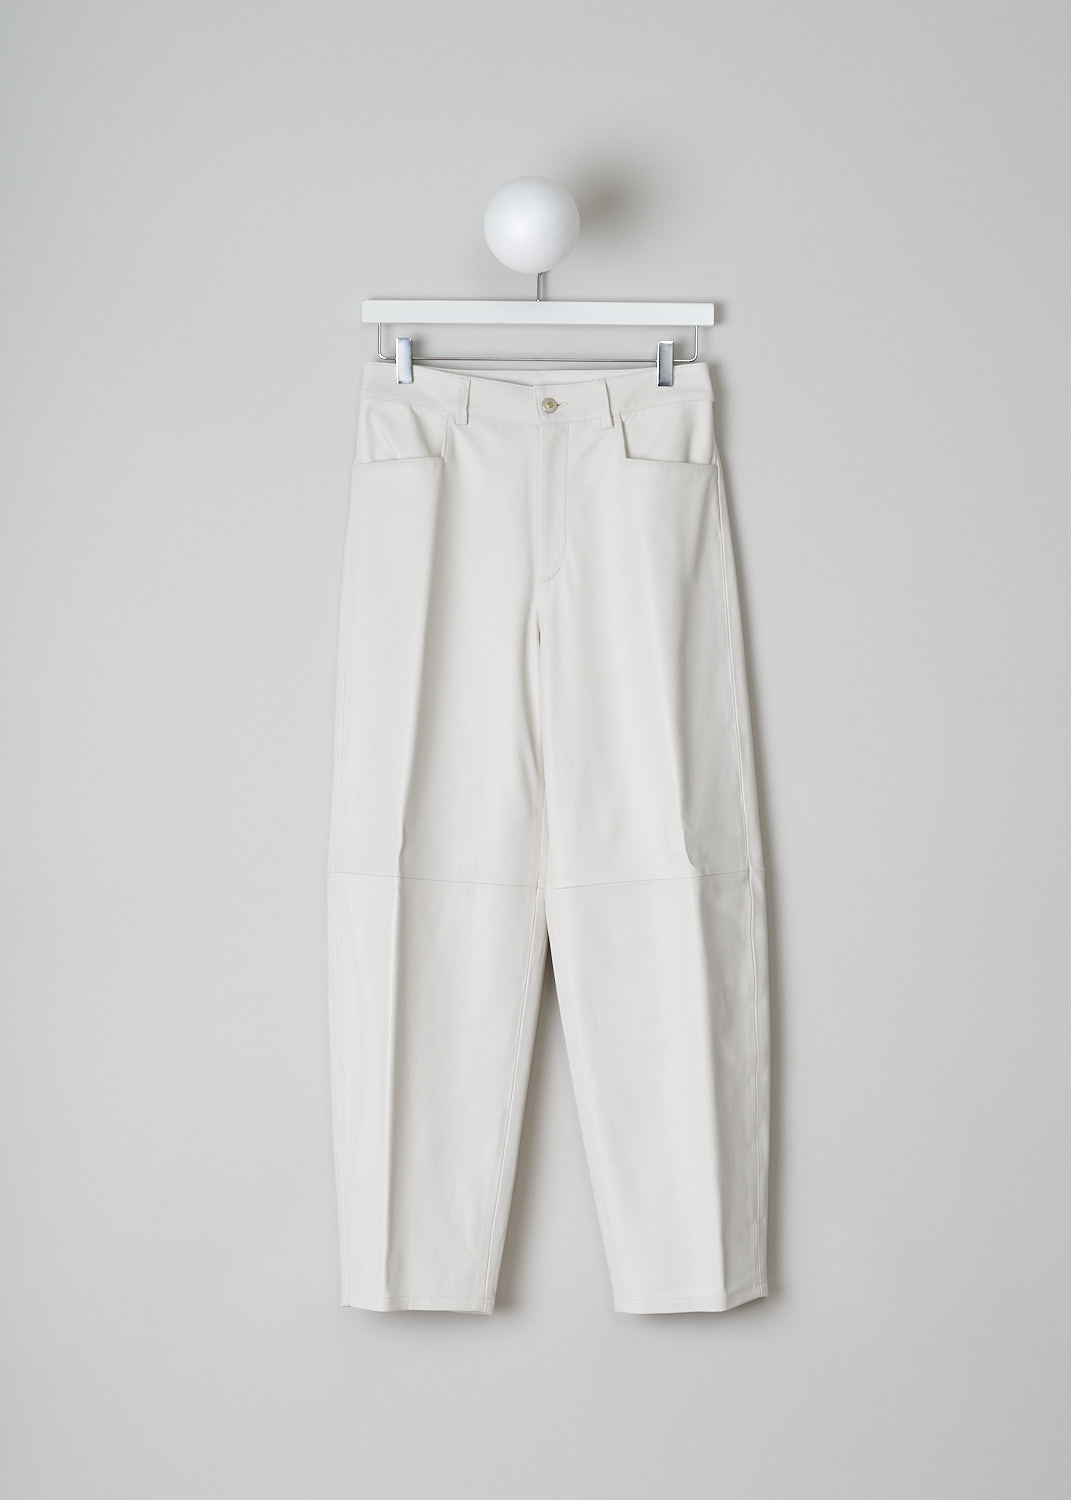 WANDLER, CHAMOMILE LILY PANTS, 22306_060301_1064_CHAMOMILE_LILY, White, Front, These white leather Chamomile Lily pants have a waistband with belt loops and a button and zip closure. The pants have a high-waisted fit. The balloon legs are cropped at the ankle. These pants have slanted pockets in the front and patch pockets in the back. 

